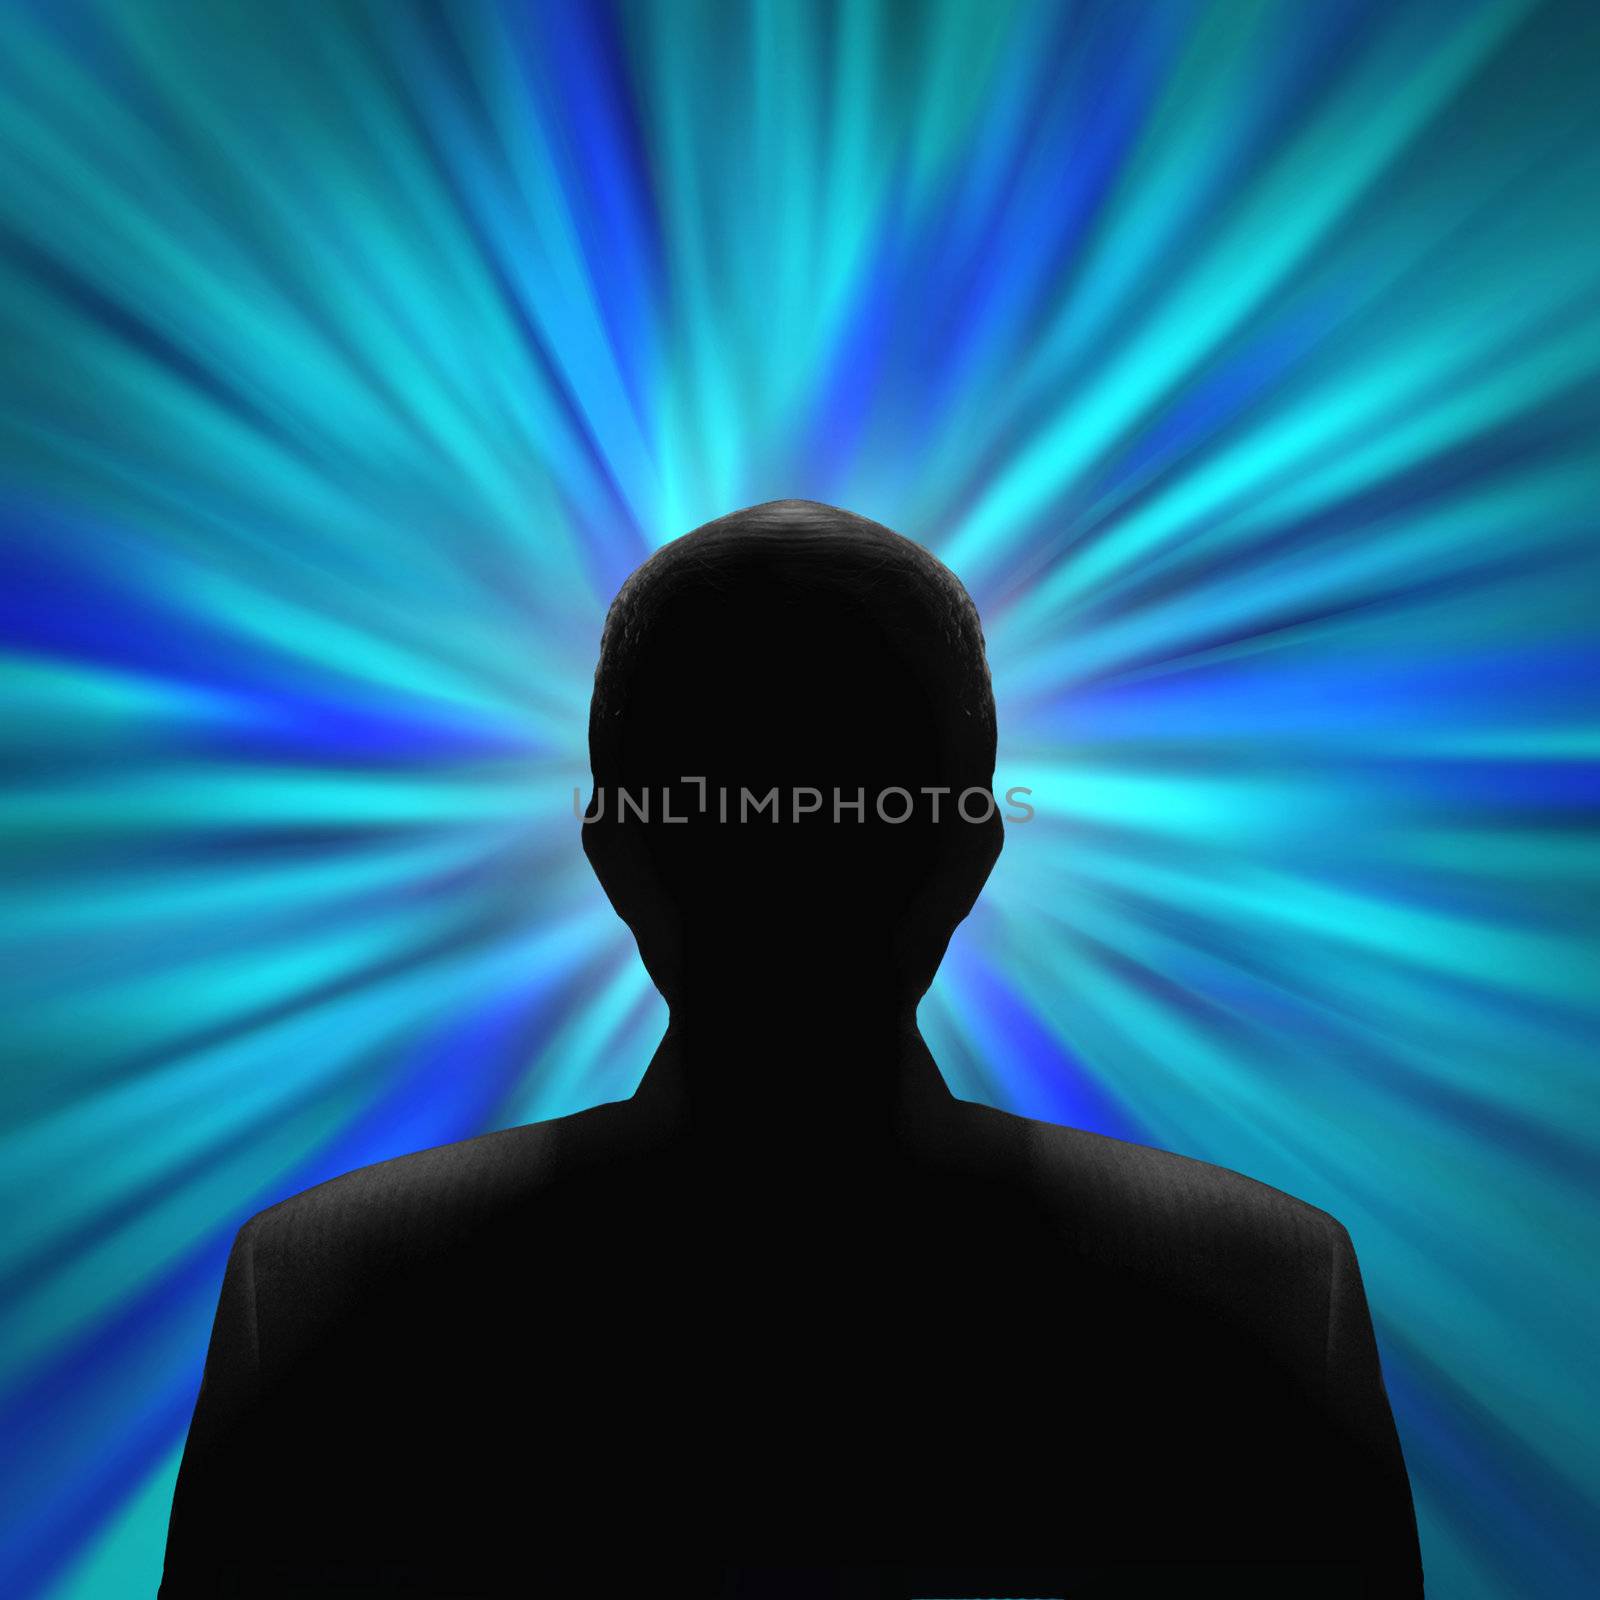 Black silhouette of a mysterious man in front of a blue vortex